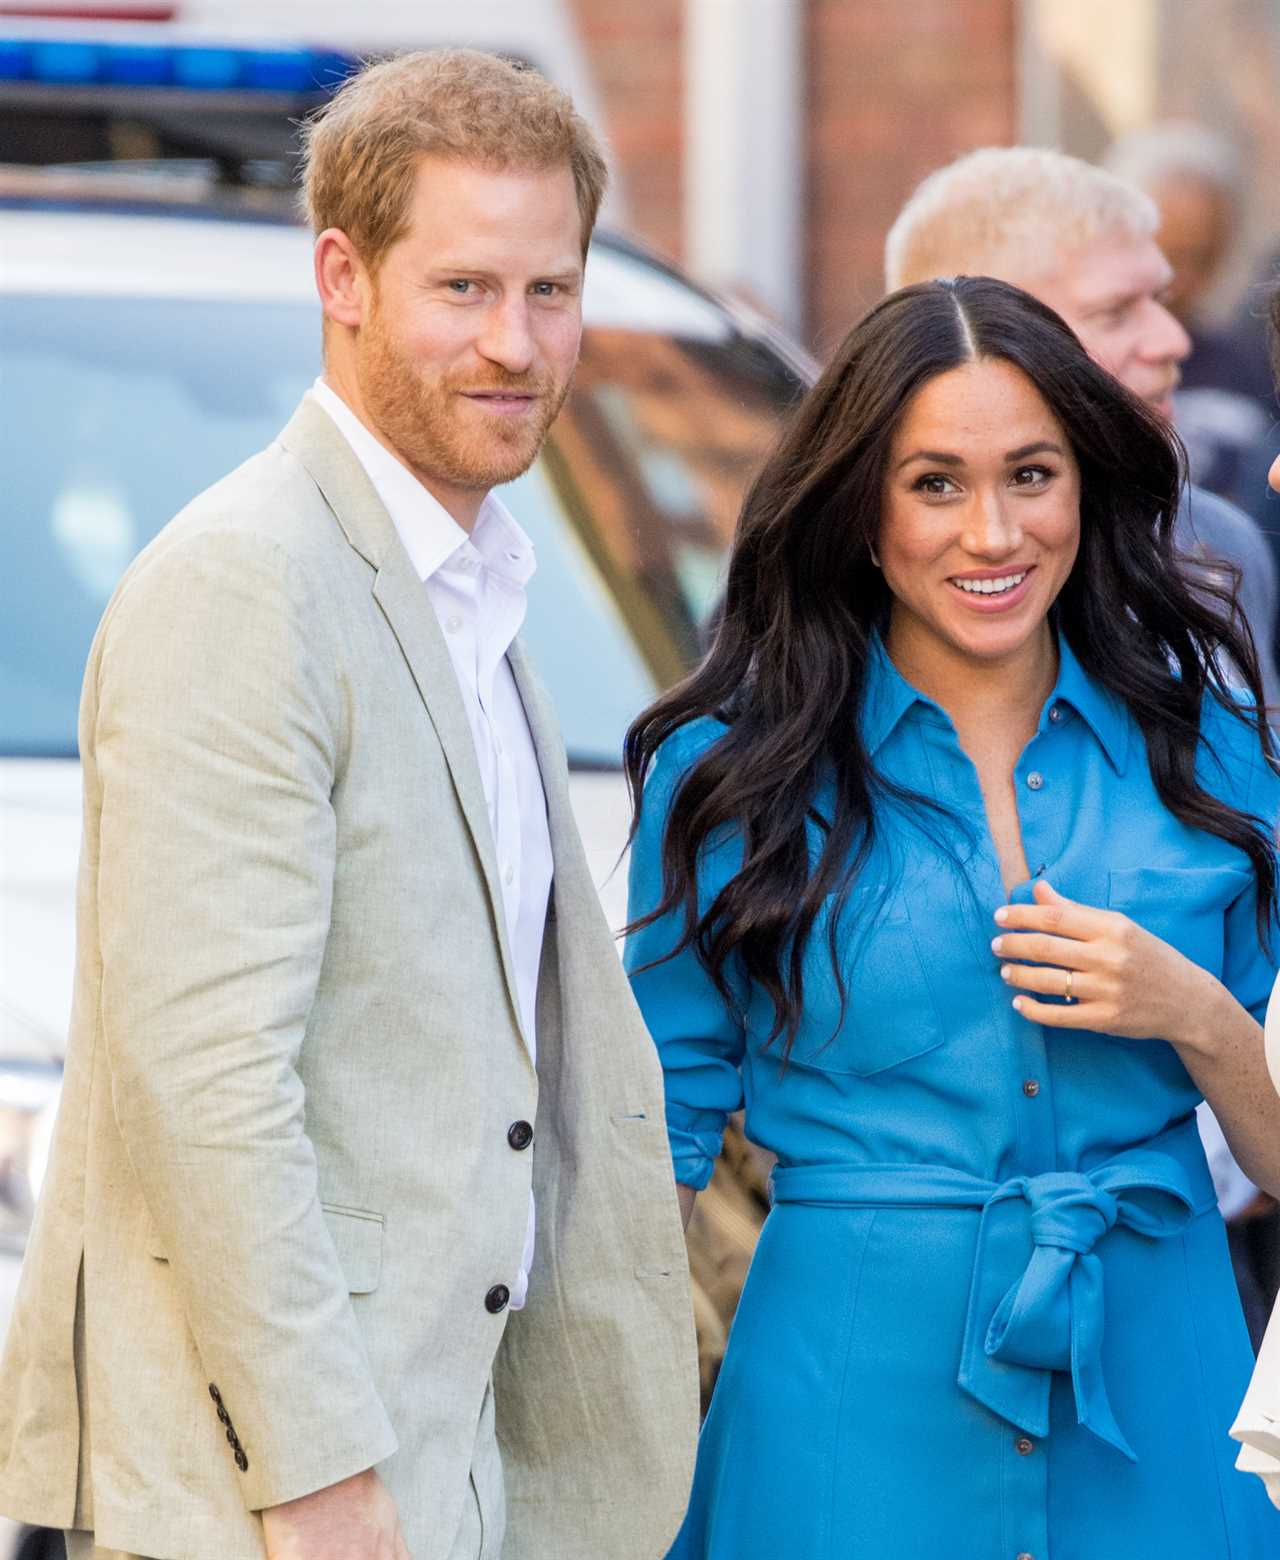 How Meghan Markle & Prince Harry are marking major holiday without Royal Family – their celebrations are not very regal